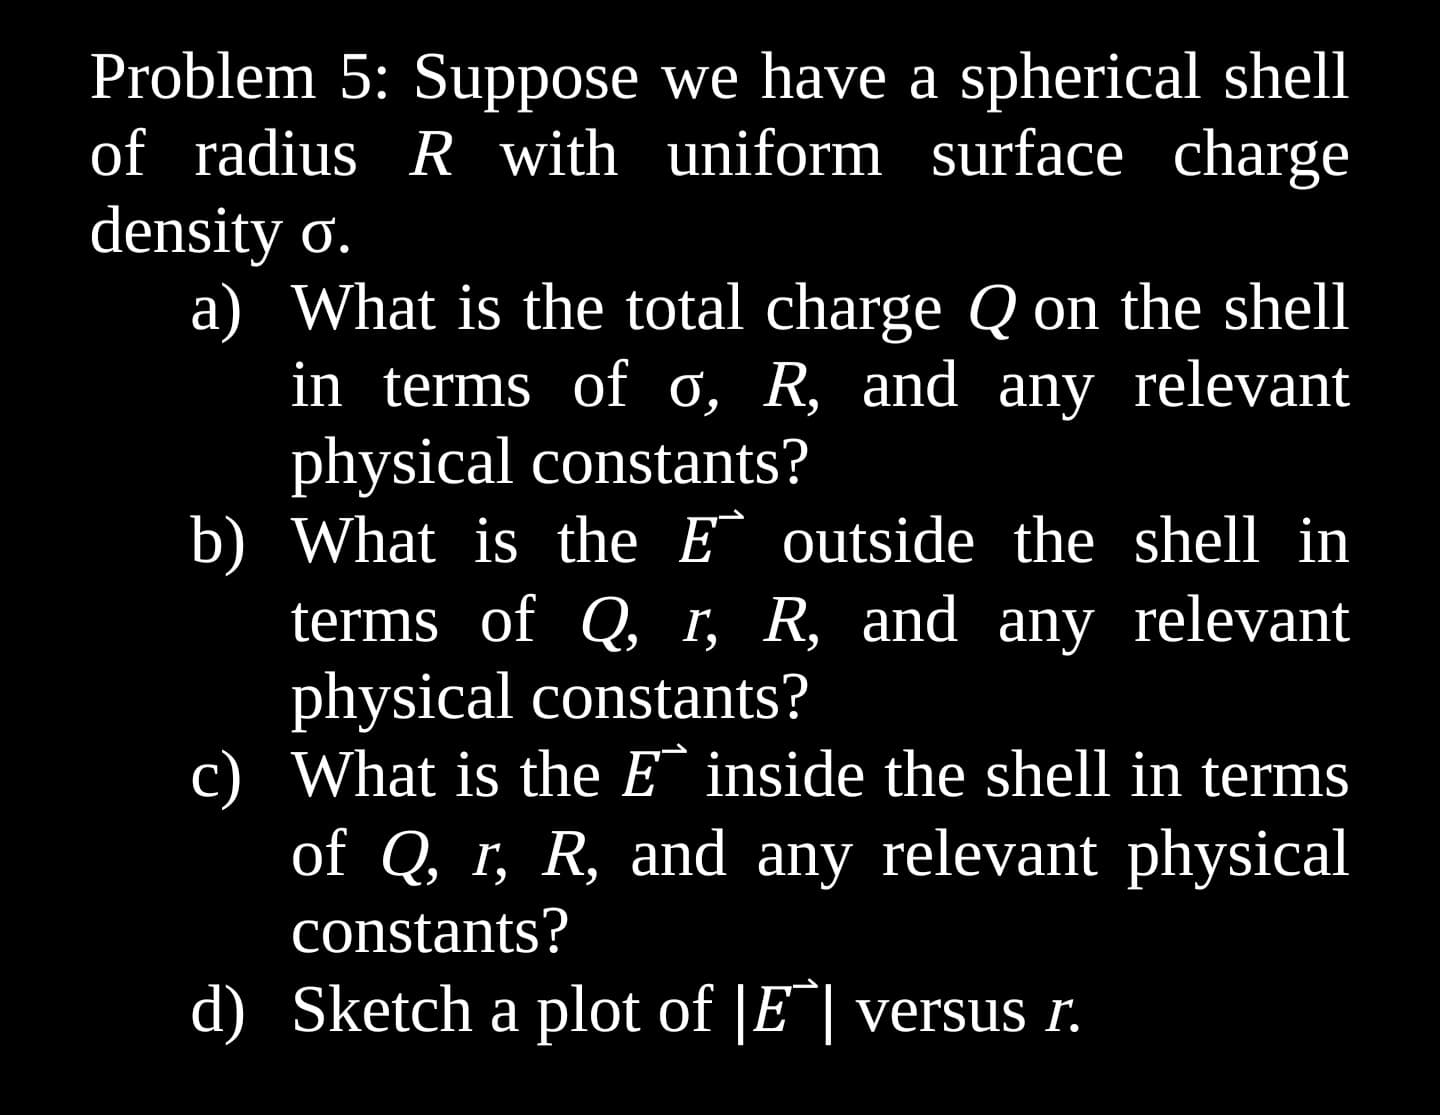 Problem 5: Suppose we have a spherical shell
of radius R with uniform surface charge
density o.
a) What is the total charge Q on the shell
in terms of o, R, and any relevant
physical constants?
b) What is the E outside the shell in
terms of Q, r, R, and any relevant
physical constants?
c) What is the E inside the shell in terms
of Q, r, R, and any relevant physical
constants?
d) Sketch a plot of |E| versus r.